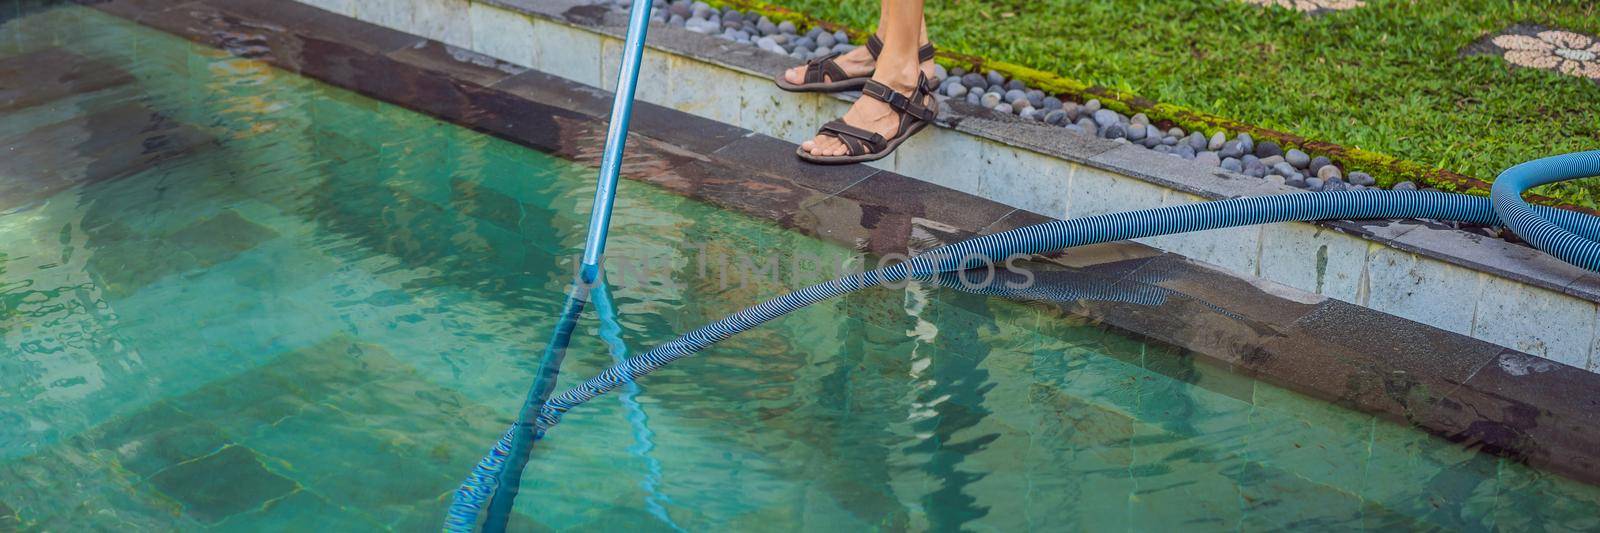 Cleaner of the swimming pool . Man in a blue shirt with cleaning equipment for swimming pools. Pool cleaning services BANNER, LONG FORMAT by galitskaya